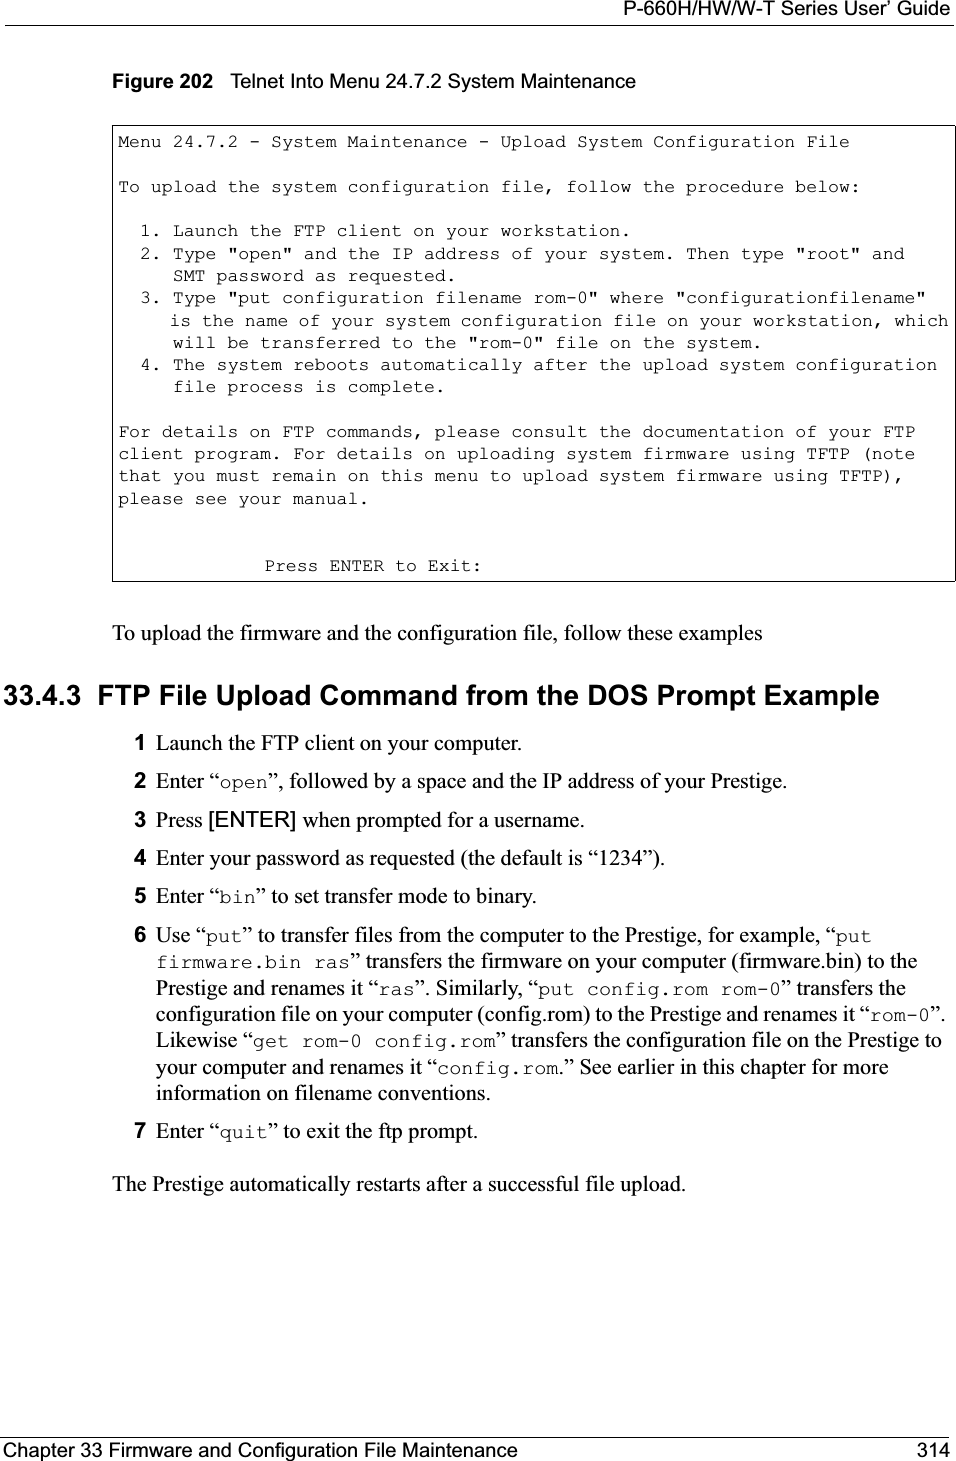 P-660H/HW/W-T Series User’ GuideChapter 33 Firmware and Configuration File Maintenance 314Figure 202   Telnet Into Menu 24.7.2 System Maintenance To upload the firmware and the configuration file, follow these examples33.4.3  FTP File Upload Command from the DOS Prompt Example1Launch the FTP client on your computer.2Enter “open”, followed by a space and the IP address of your Prestige. 3Press [ENTER] when prompted for a username.4Enter your password as requested (the default is “1234”).5Enter “bin” to set transfer mode to binary.6Use “put” to transfer files from the computer to the Prestige, for example, “putfirmware.bin ras” transfers the firmware on your computer (firmware.bin) to the Prestige and renames it “ras”. Similarly, “put config.rom rom-0” transfers the configuration file on your computer (config.rom) to the Prestige and renames it “rom-0”.Likewise “get rom-0 config.rom” transfers the configuration file on the Prestige to your computer and renames it “config.rom.” See earlier in this chapter for more information on filename conventions.7Enter “quit” to exit the ftp prompt.The Prestige automatically restarts after a successful file upload.Menu 24.7.2 - System Maintenance - Upload System Configuration FileTo upload the system configuration file, follow the procedure below:  1. Launch the FTP client on your workstation.  2. Type &quot;open&quot; and the IP address of your system. Then type &quot;root&quot; and     SMT password as requested.  3. Type &quot;put configuration filename rom-0&quot; where &quot;configurationfilename&quot;     is the name of your system configuration file on your workstation, which     will be transferred to the &quot;rom-0&quot; file on the system.  4. The system reboots automatically after the upload system configuration     file process is complete.For details on FTP commands, please consult the documentation of your FTPclient program. For details on uploading system firmware using TFTP (notethat you must remain on this menu to upload system firmware using TFTP),please see your manual.Press ENTER to Exit: